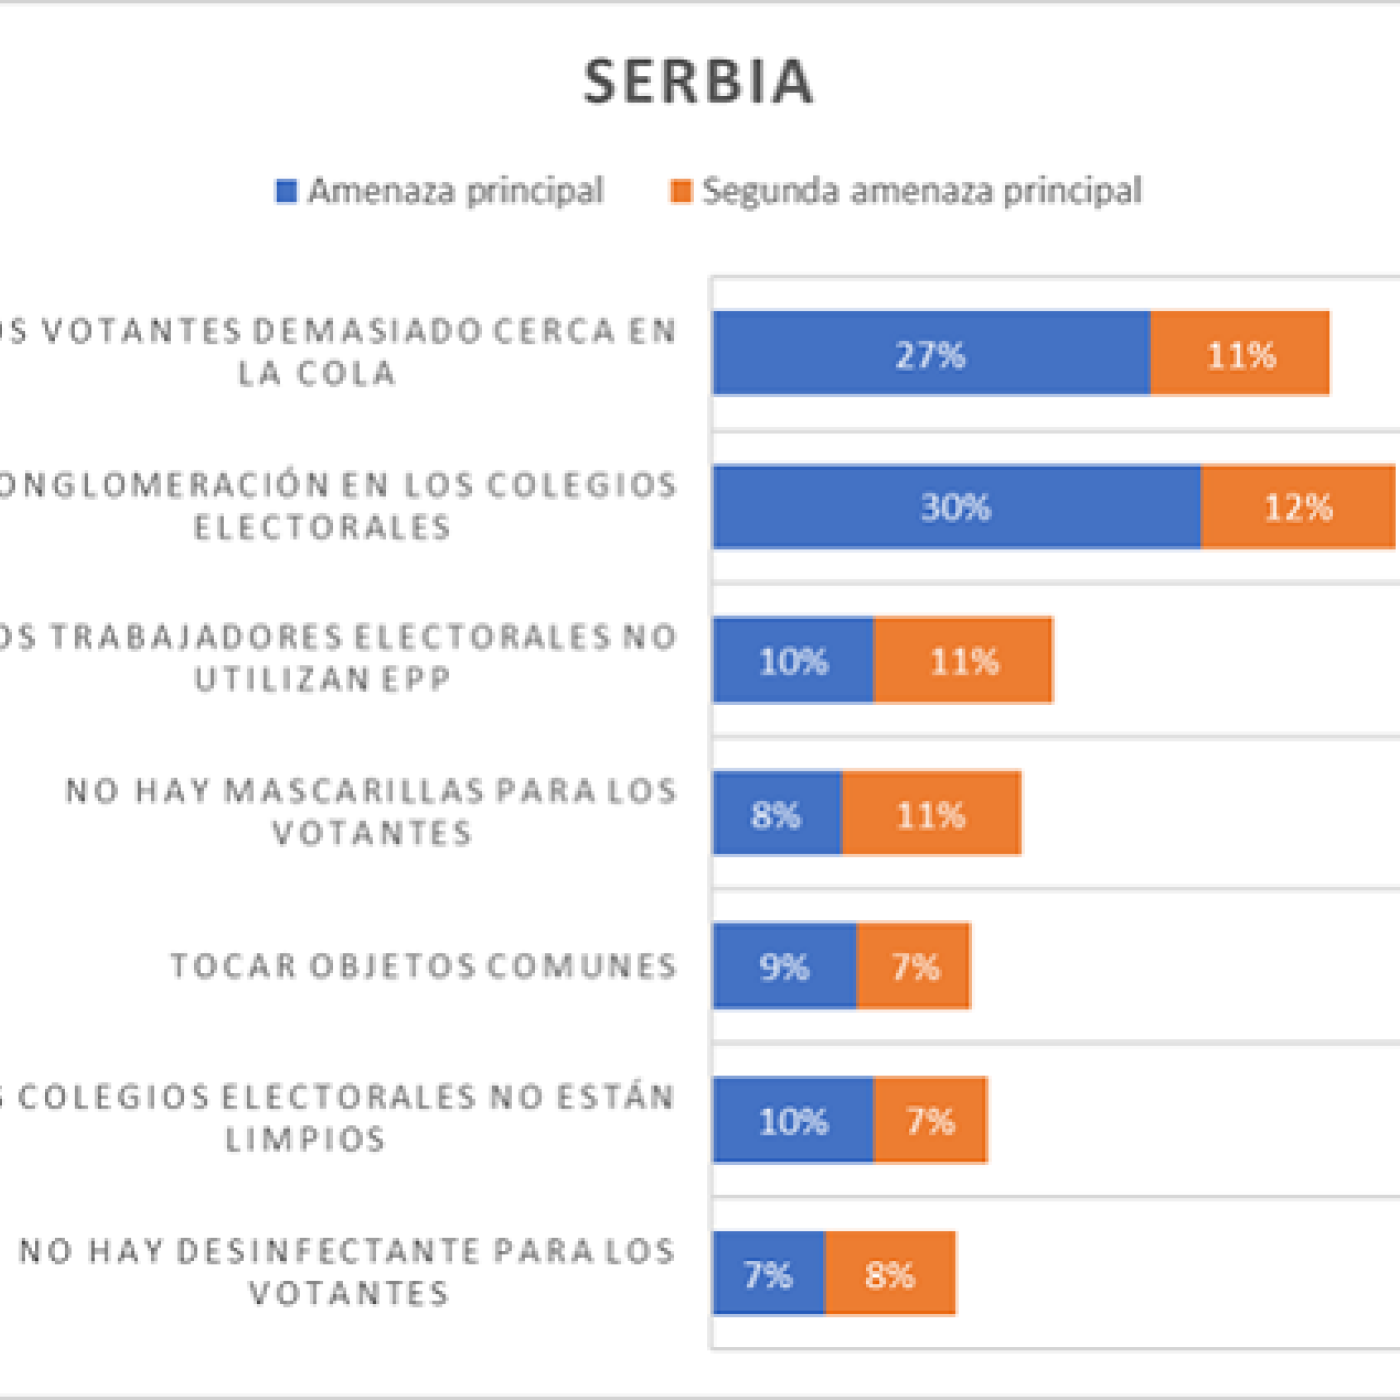 Chart depicting voters' concerns in Serbia